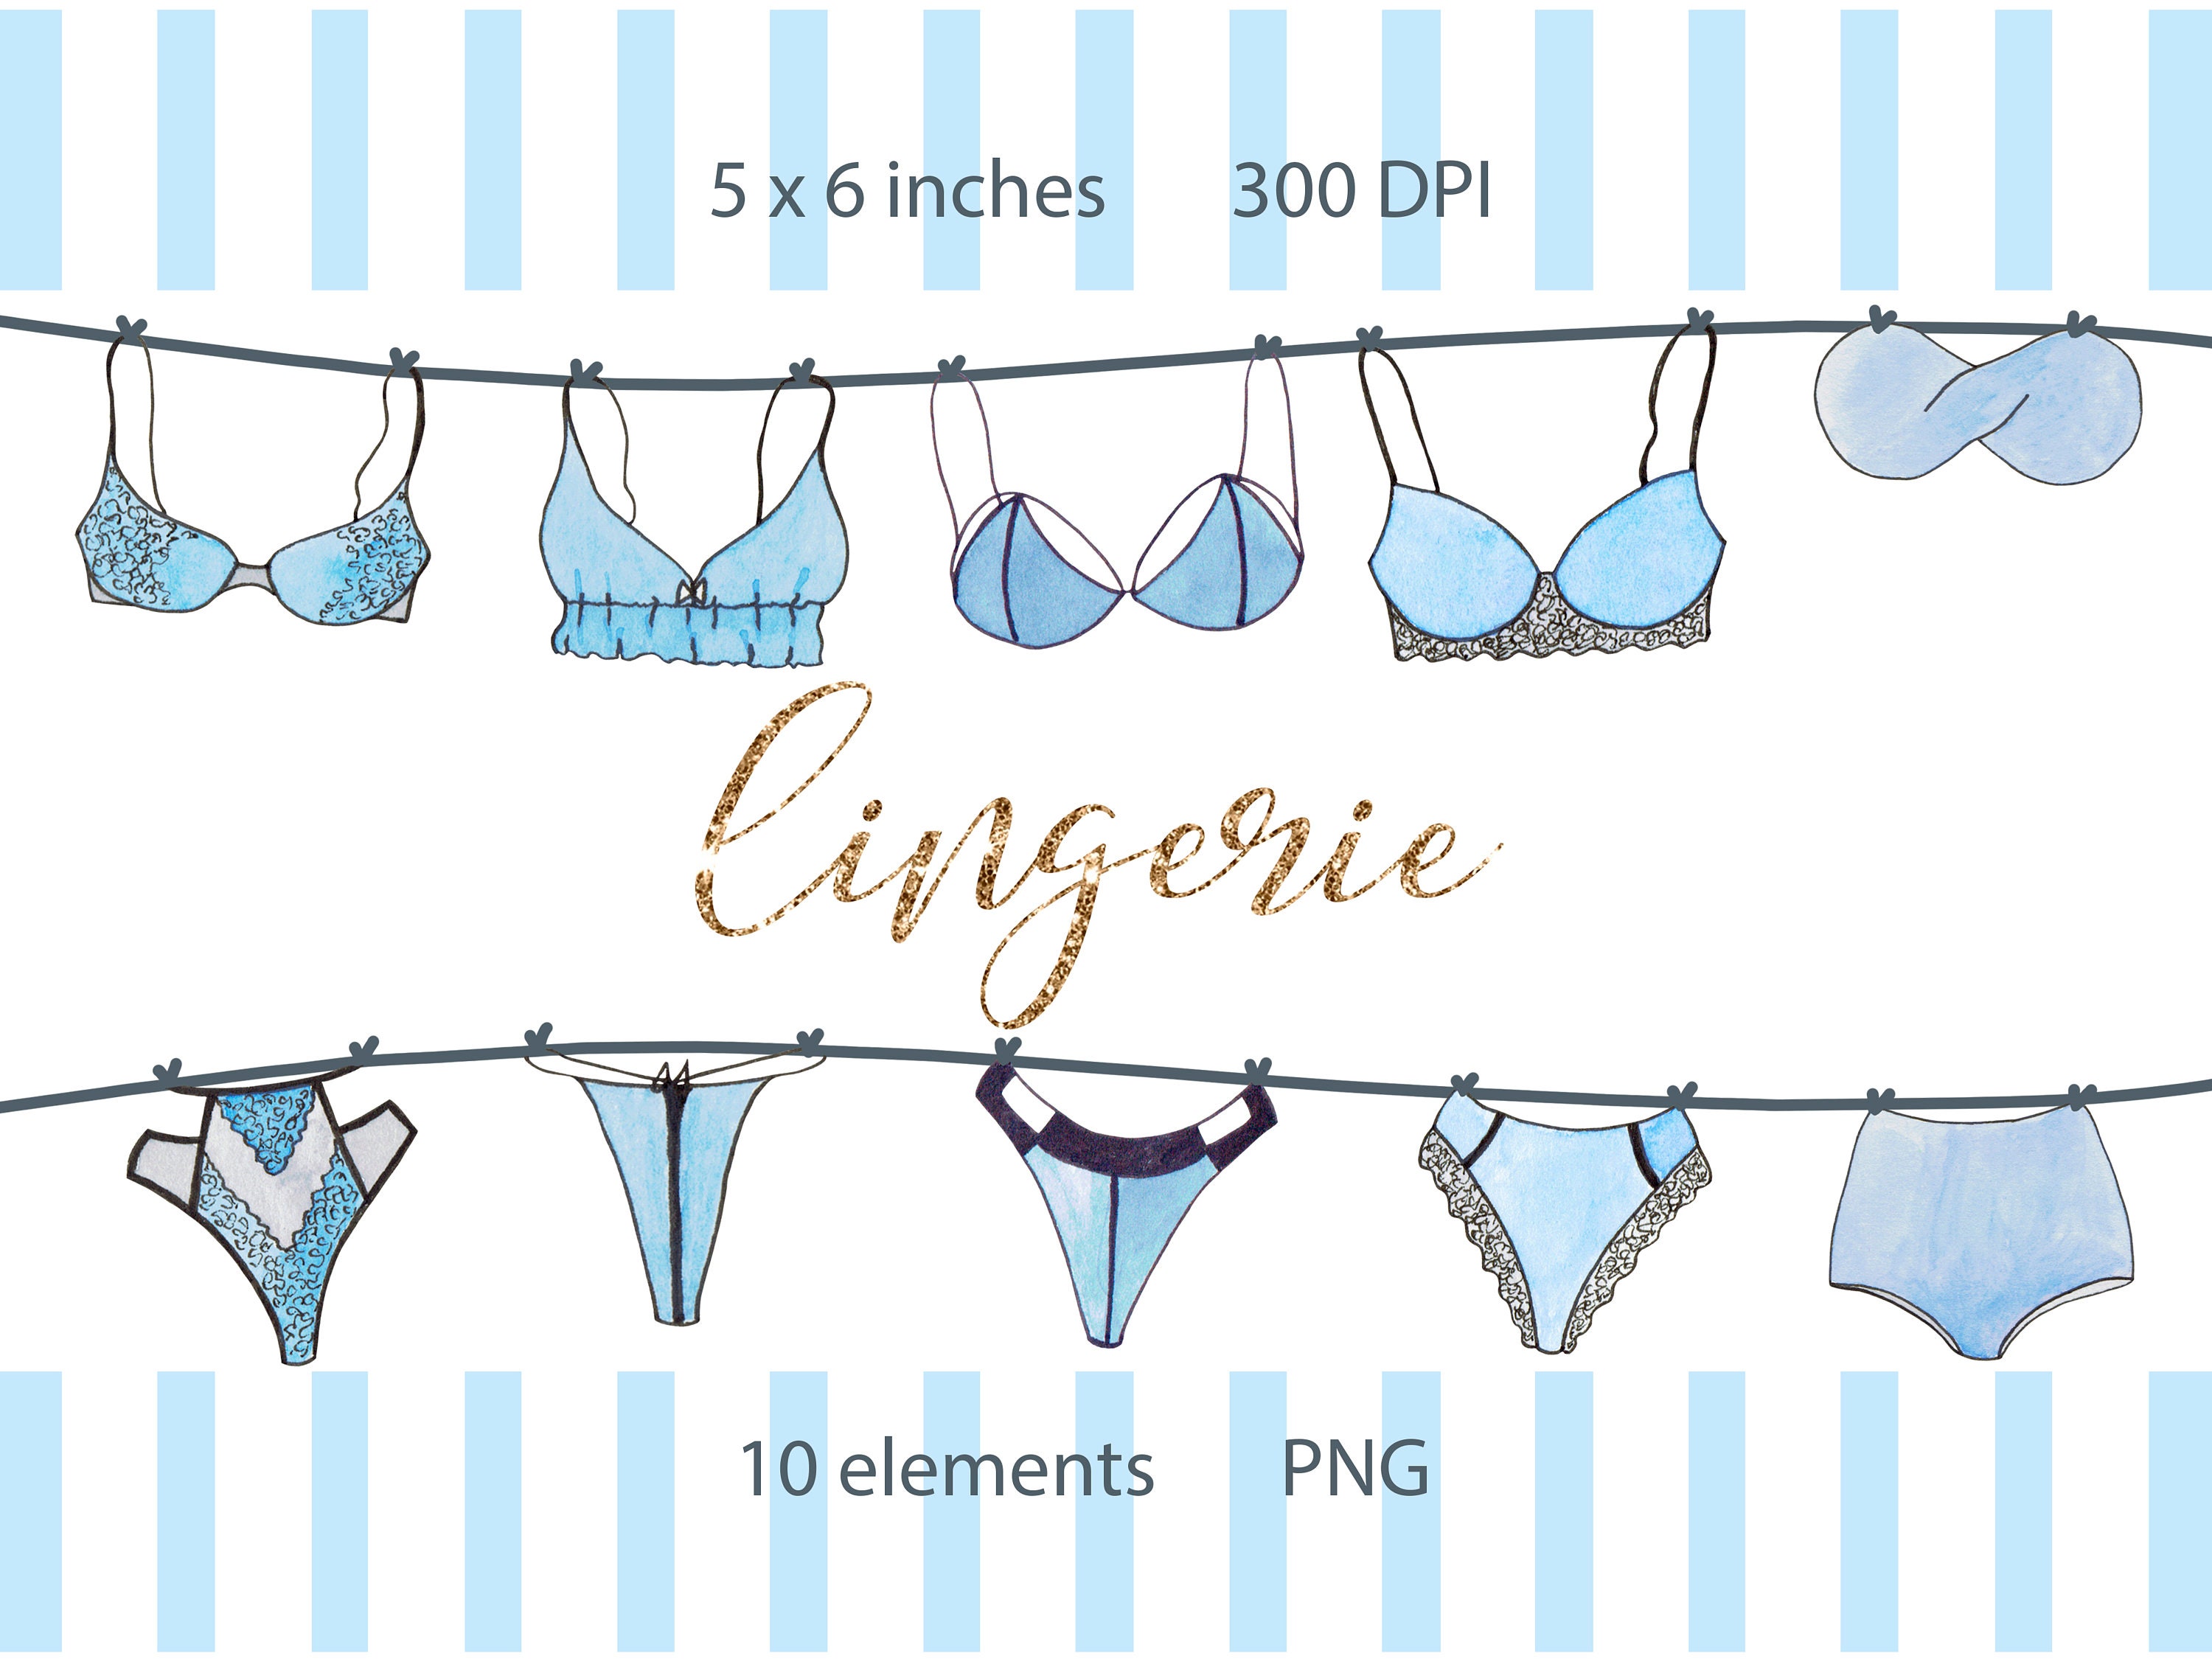 Watercolor Lingerie Clipart Bra And Panties Sexy Clipart | Etsy